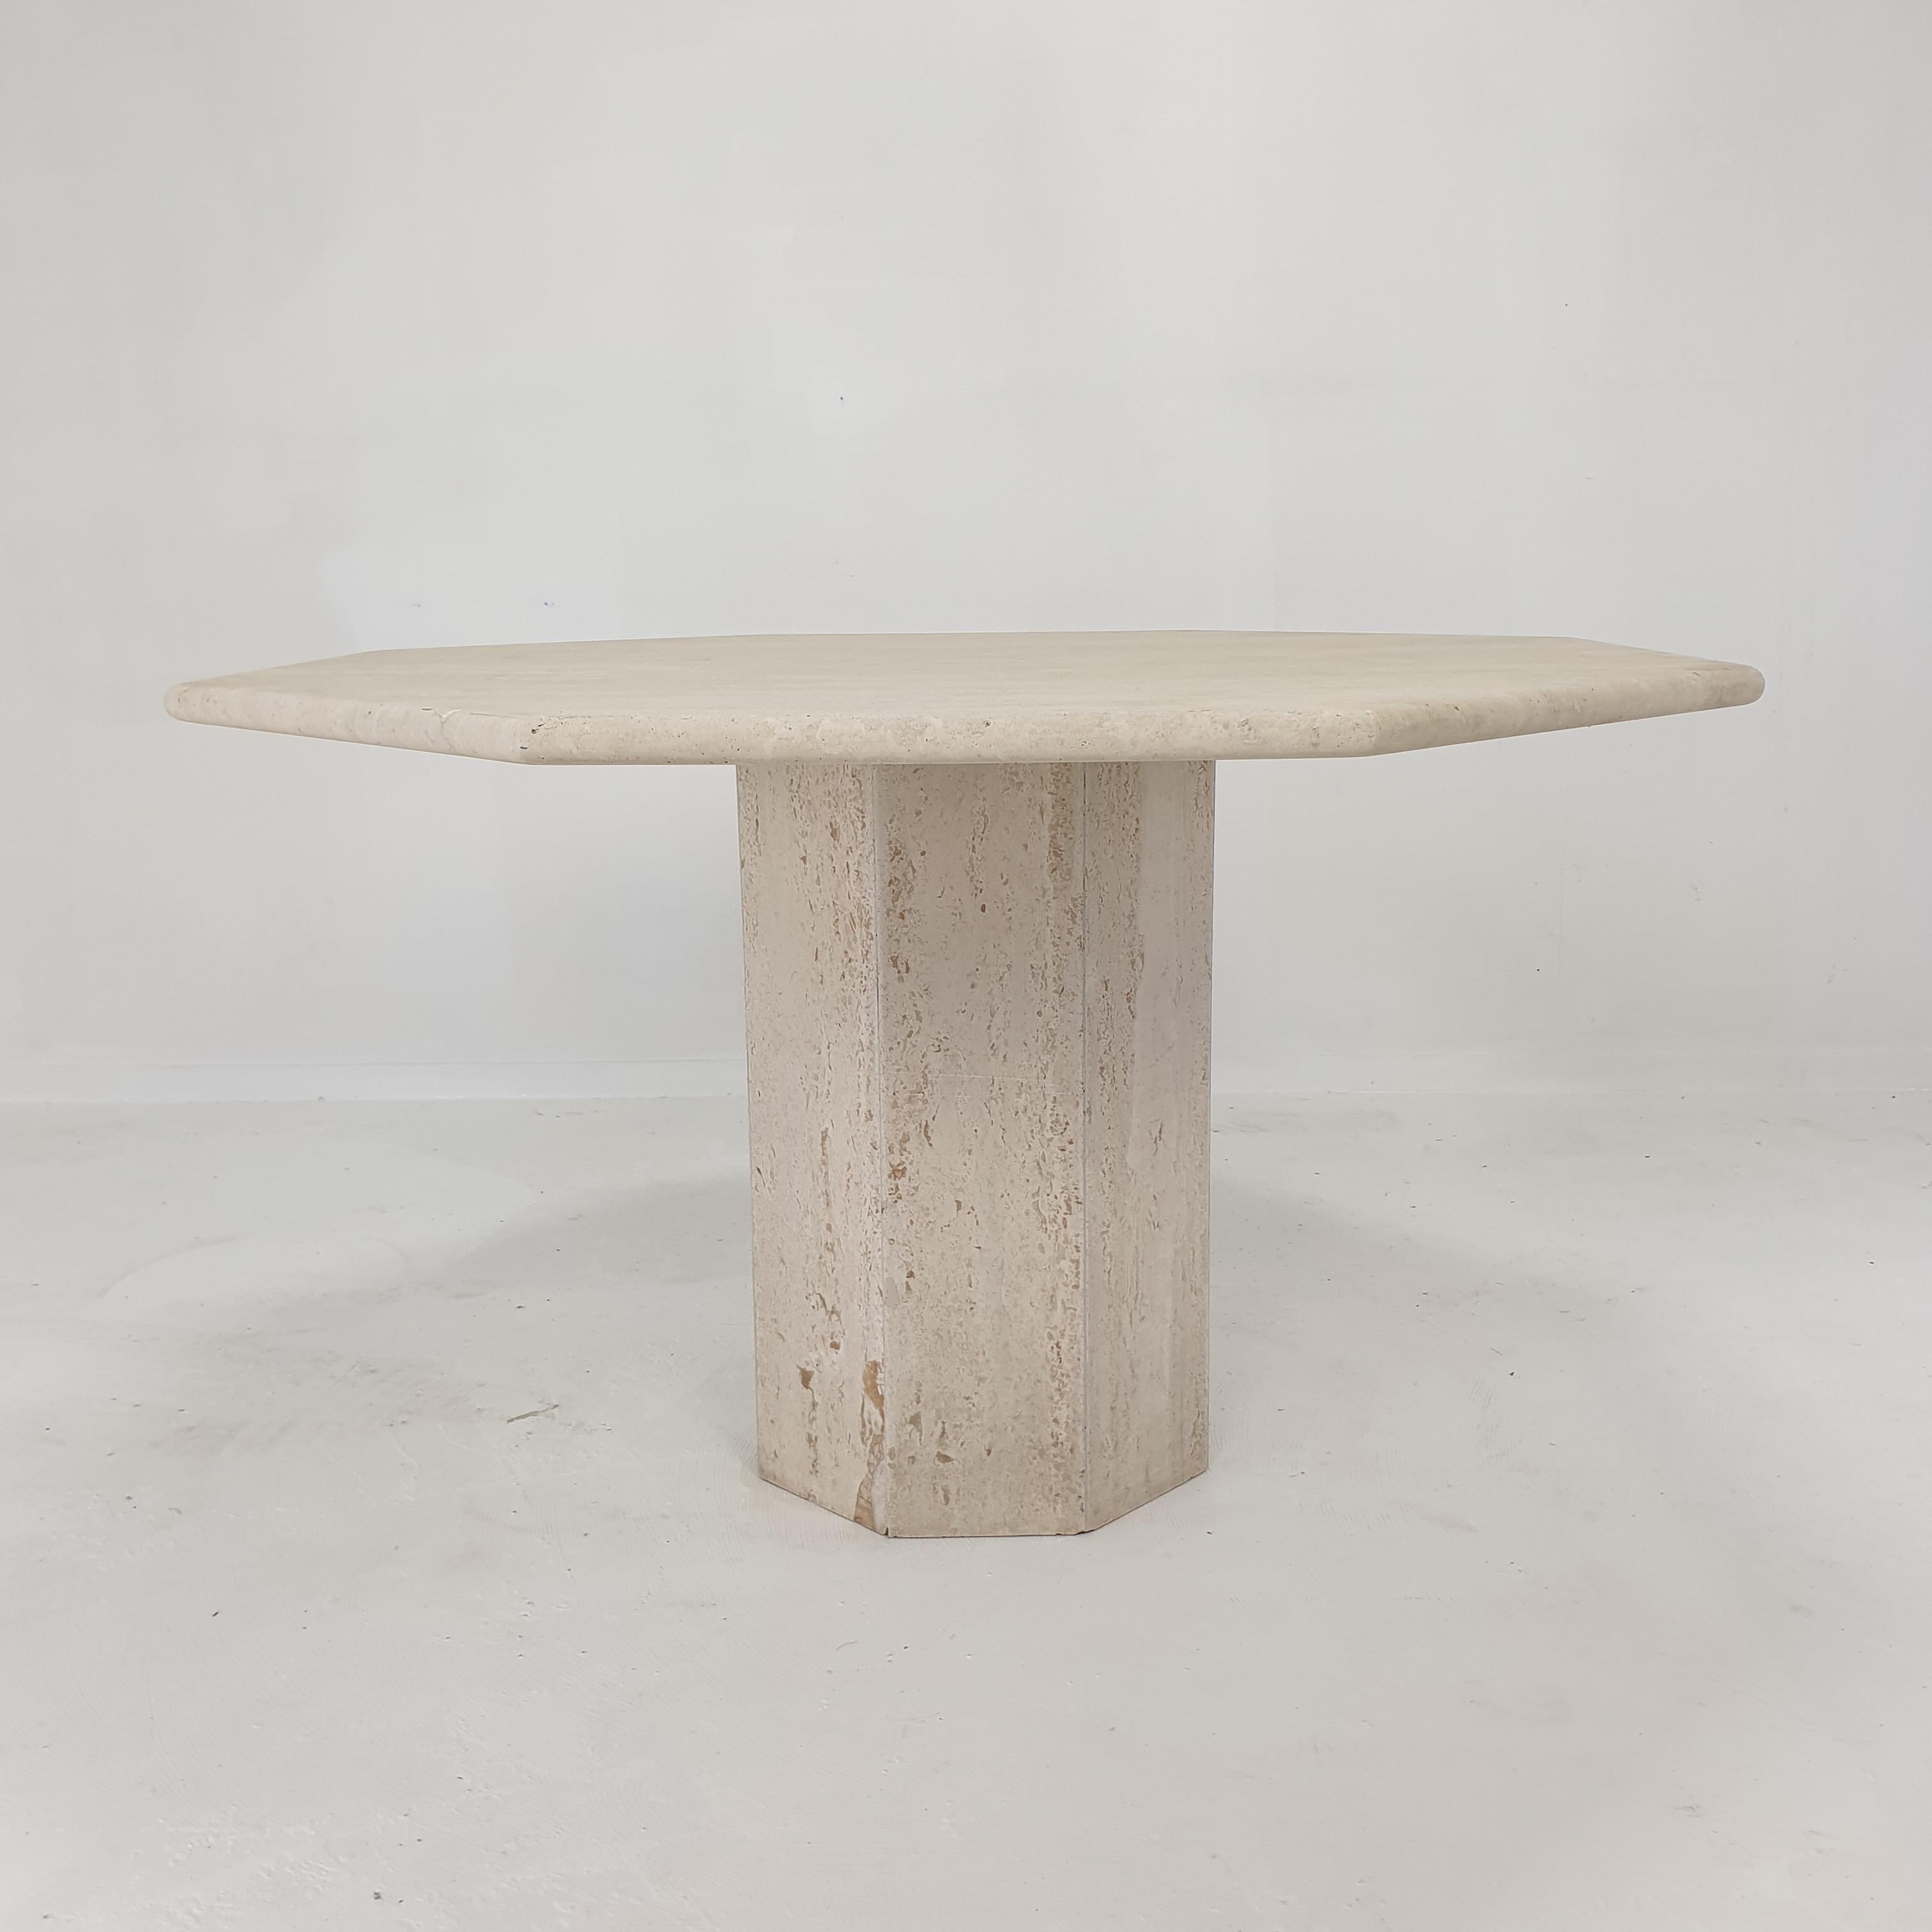 Italian Travertine Garden or Dining Table, 1970s For Sale 3